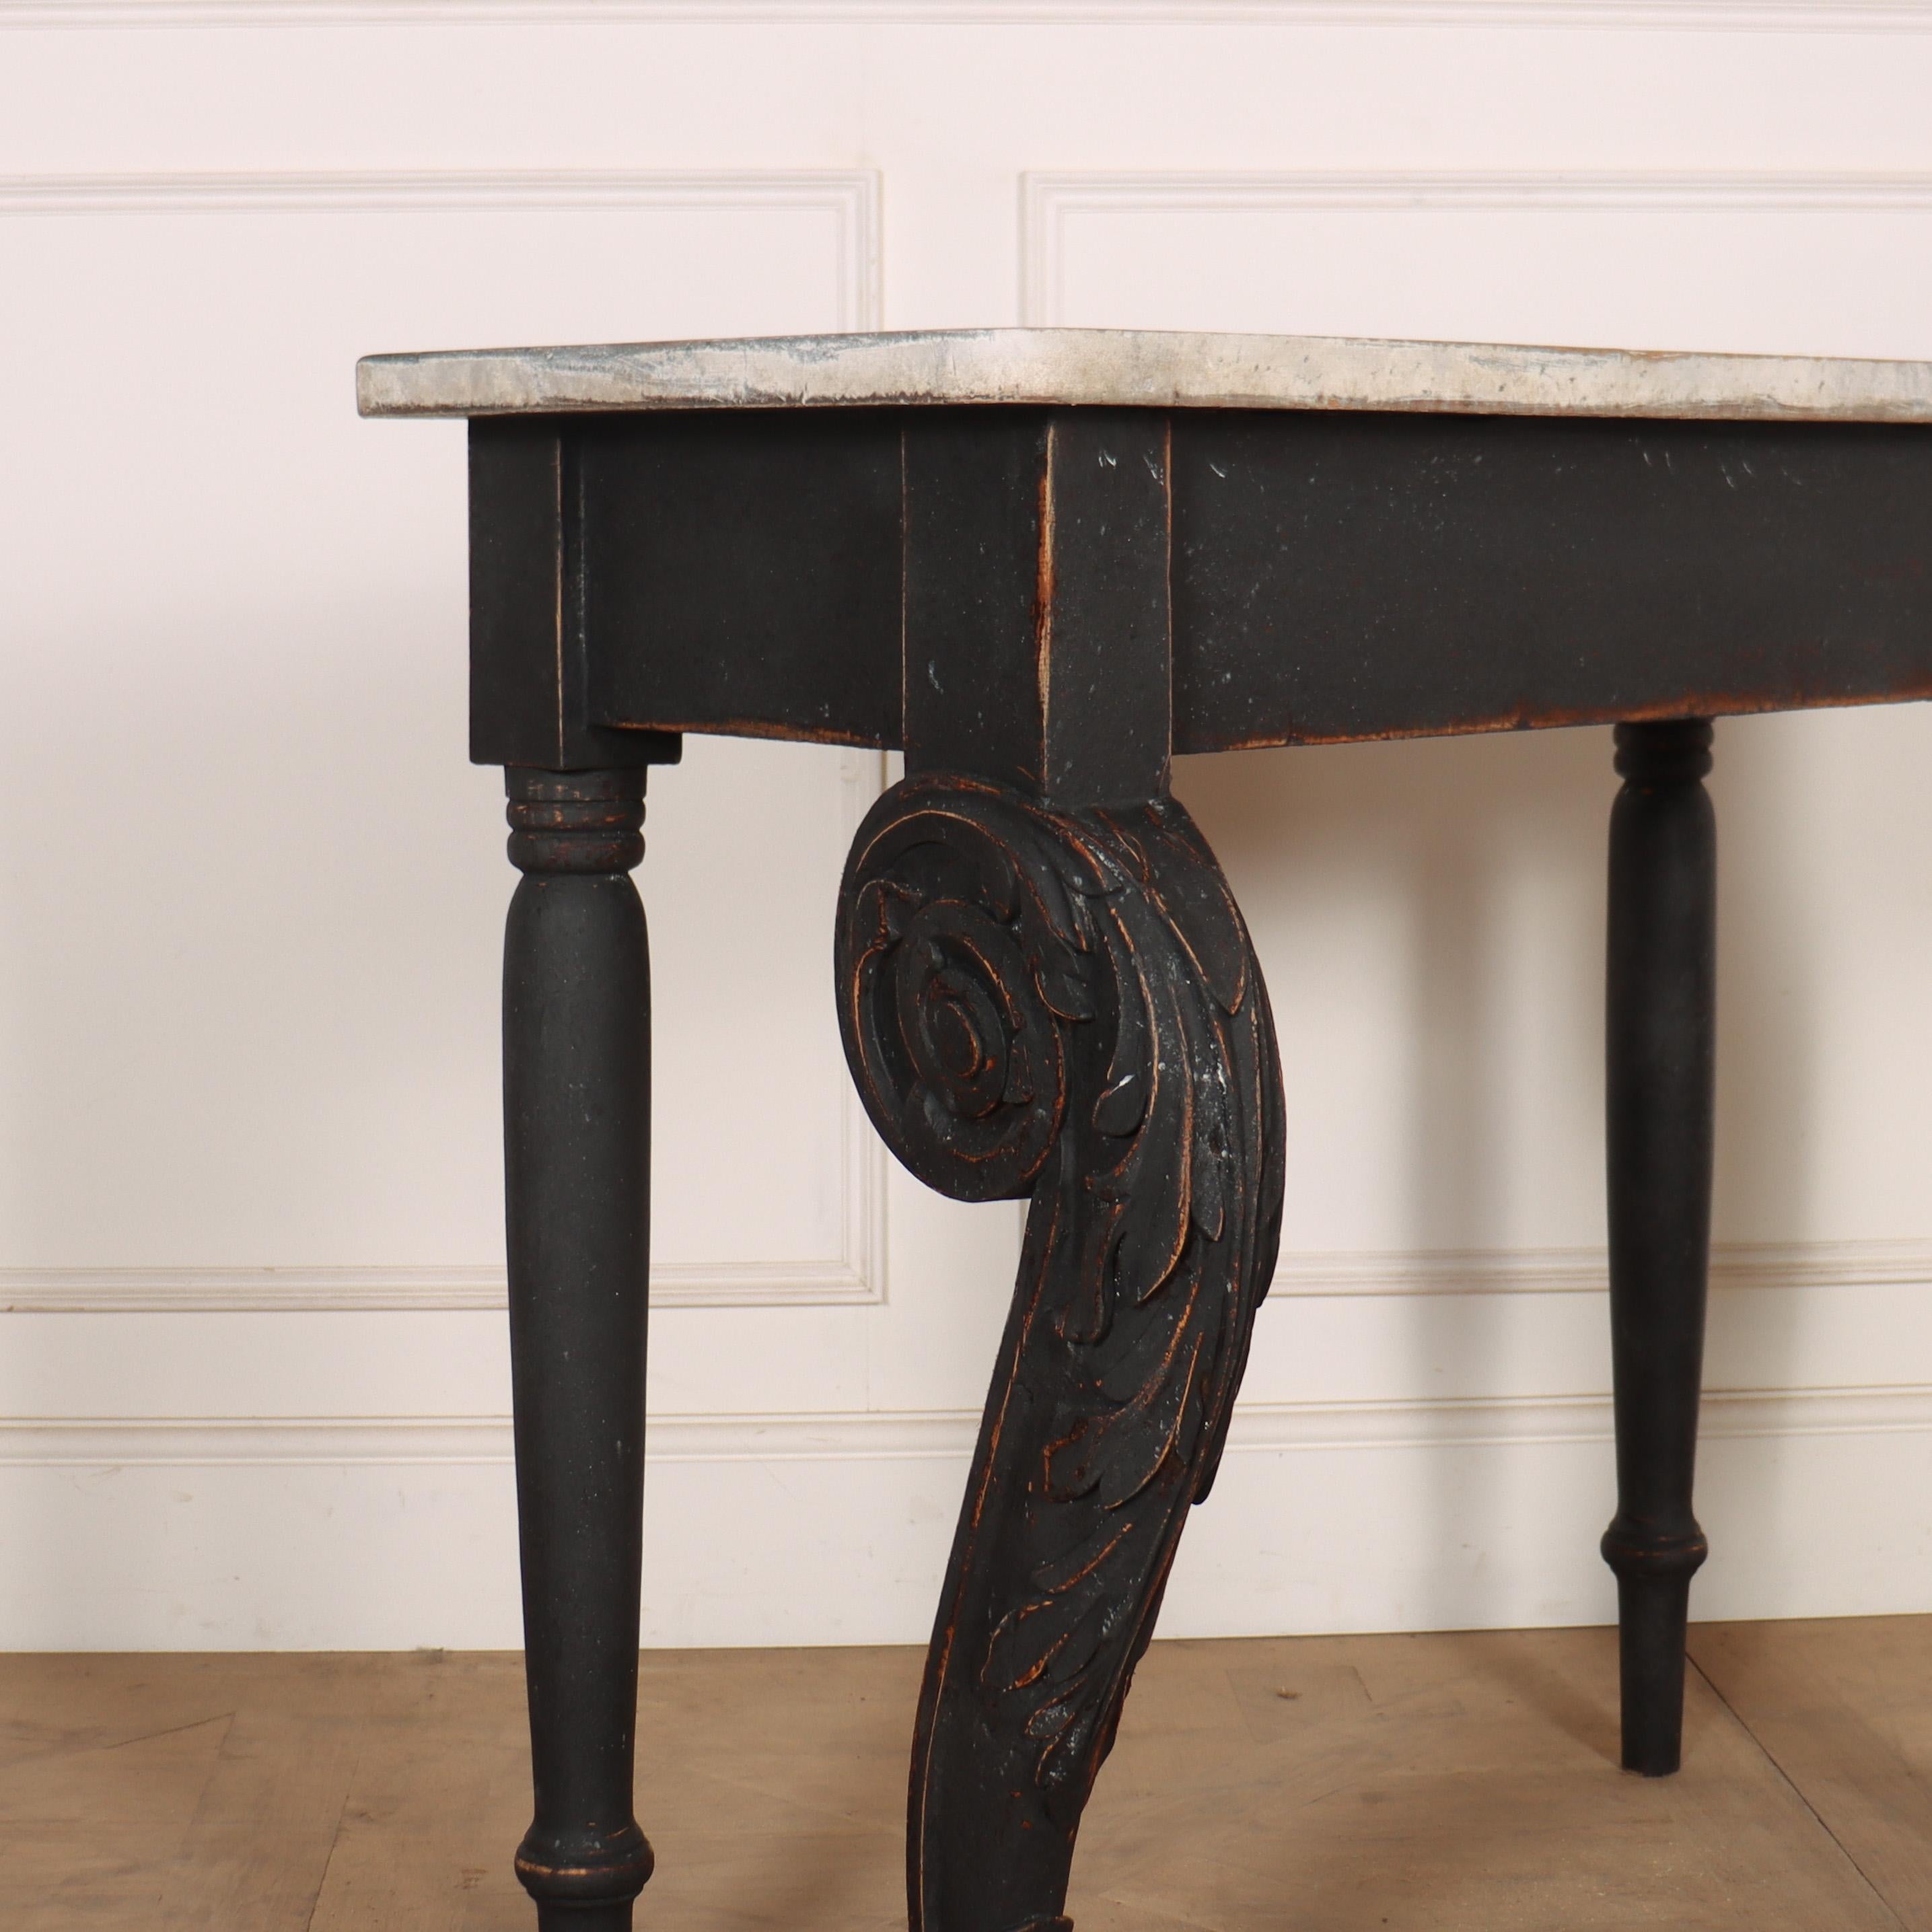 Early 19th C Scottish painted pine console table with a faux marble top. 1830.

Top depth is 18